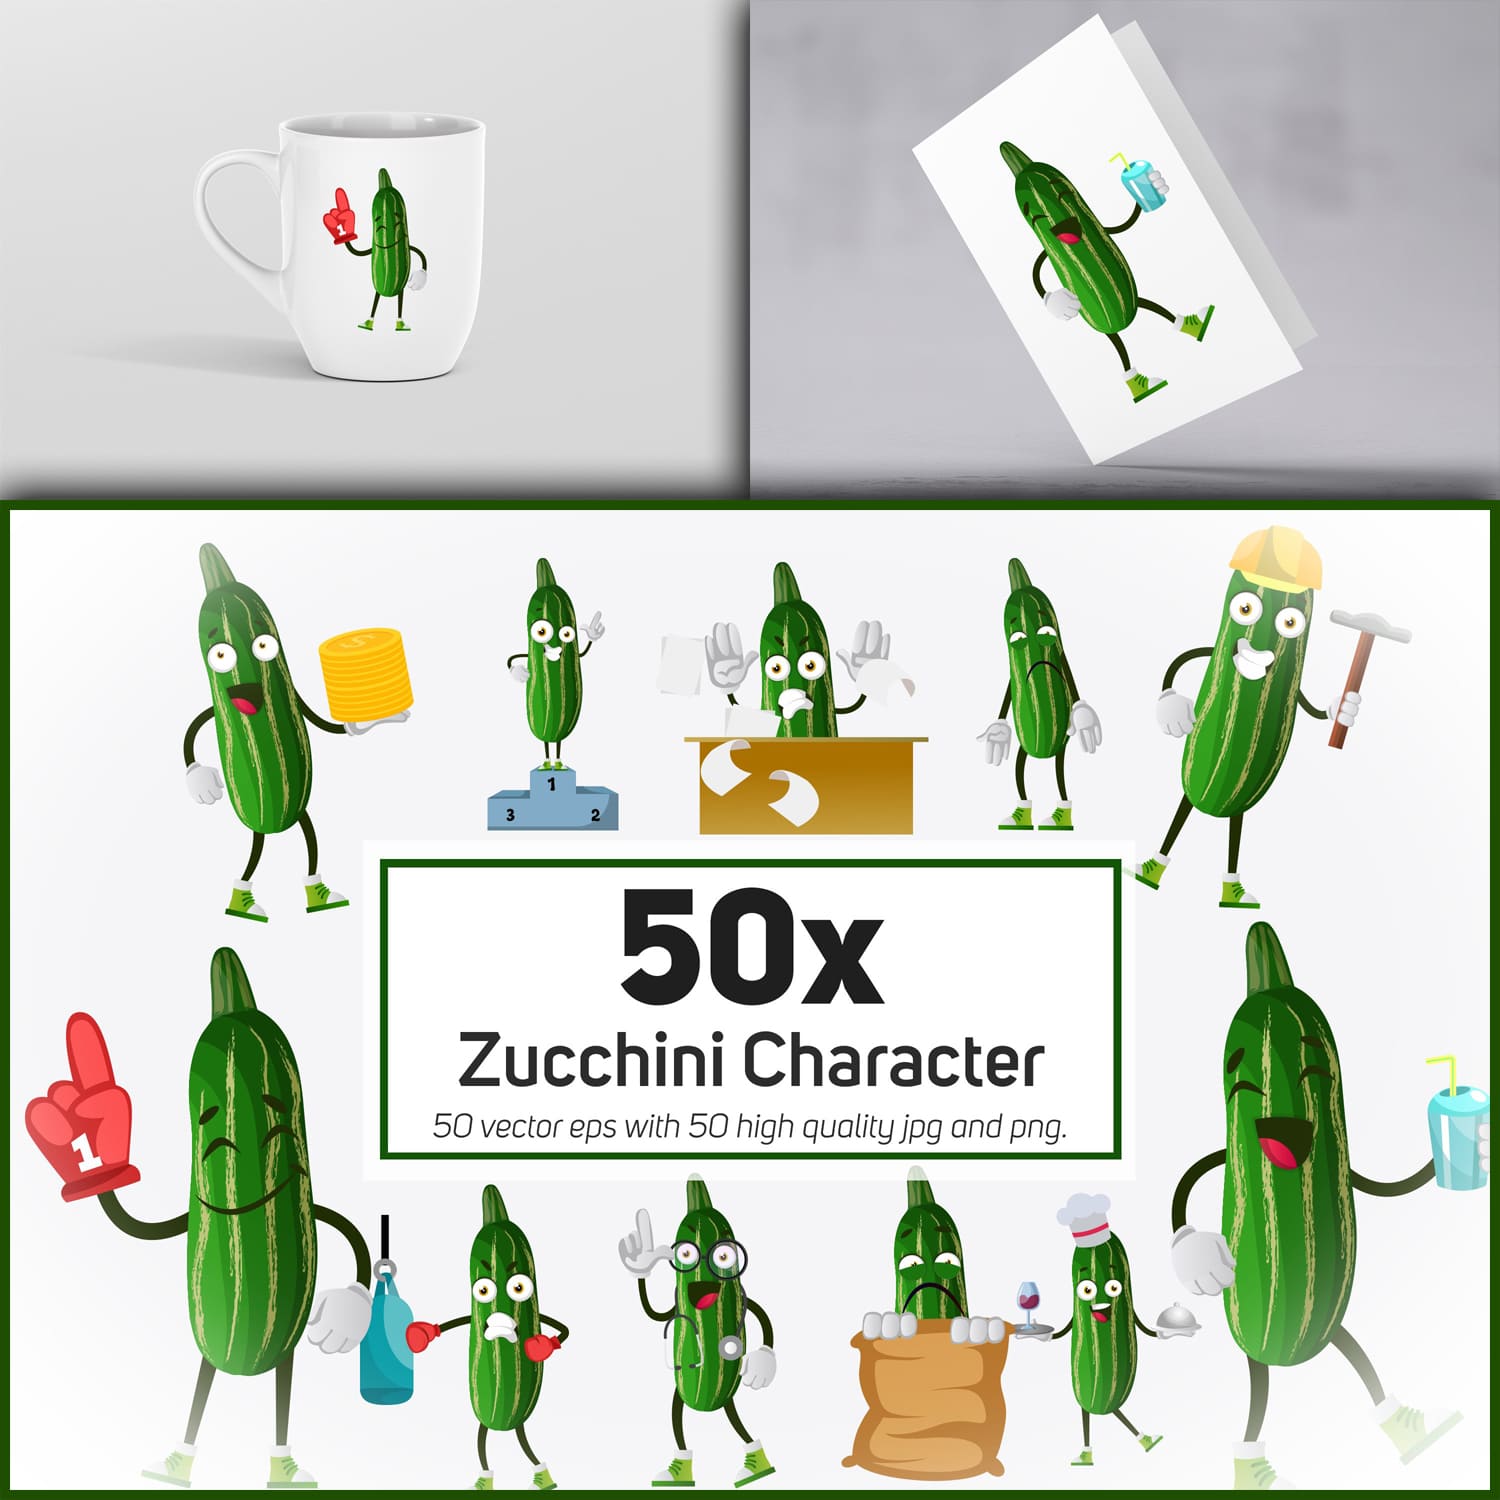 50x Zucchini Character and Mascot Collection illustration. cover.